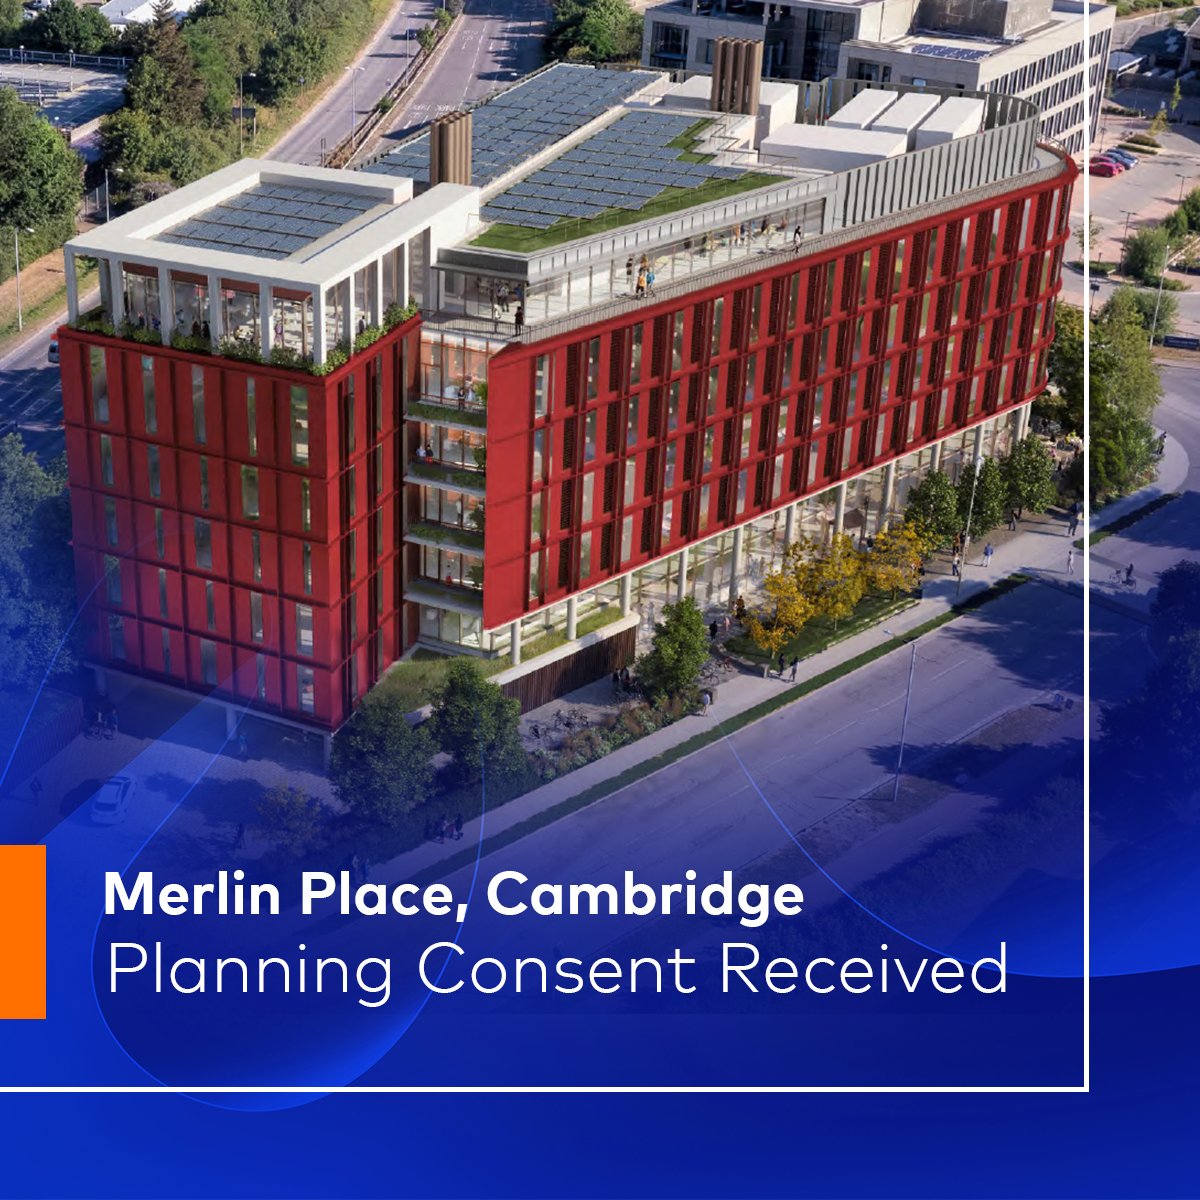 🏢 Planning consent for Merlin Place, Cambridge! This six-storey, 139,000 sq ft building, positioned as a new Gateway Building for the Cambridge North Cluster, offers modern design and flexible spaces suitable for both single and multiple tenants. kadans.co.uk/kadans-secures…